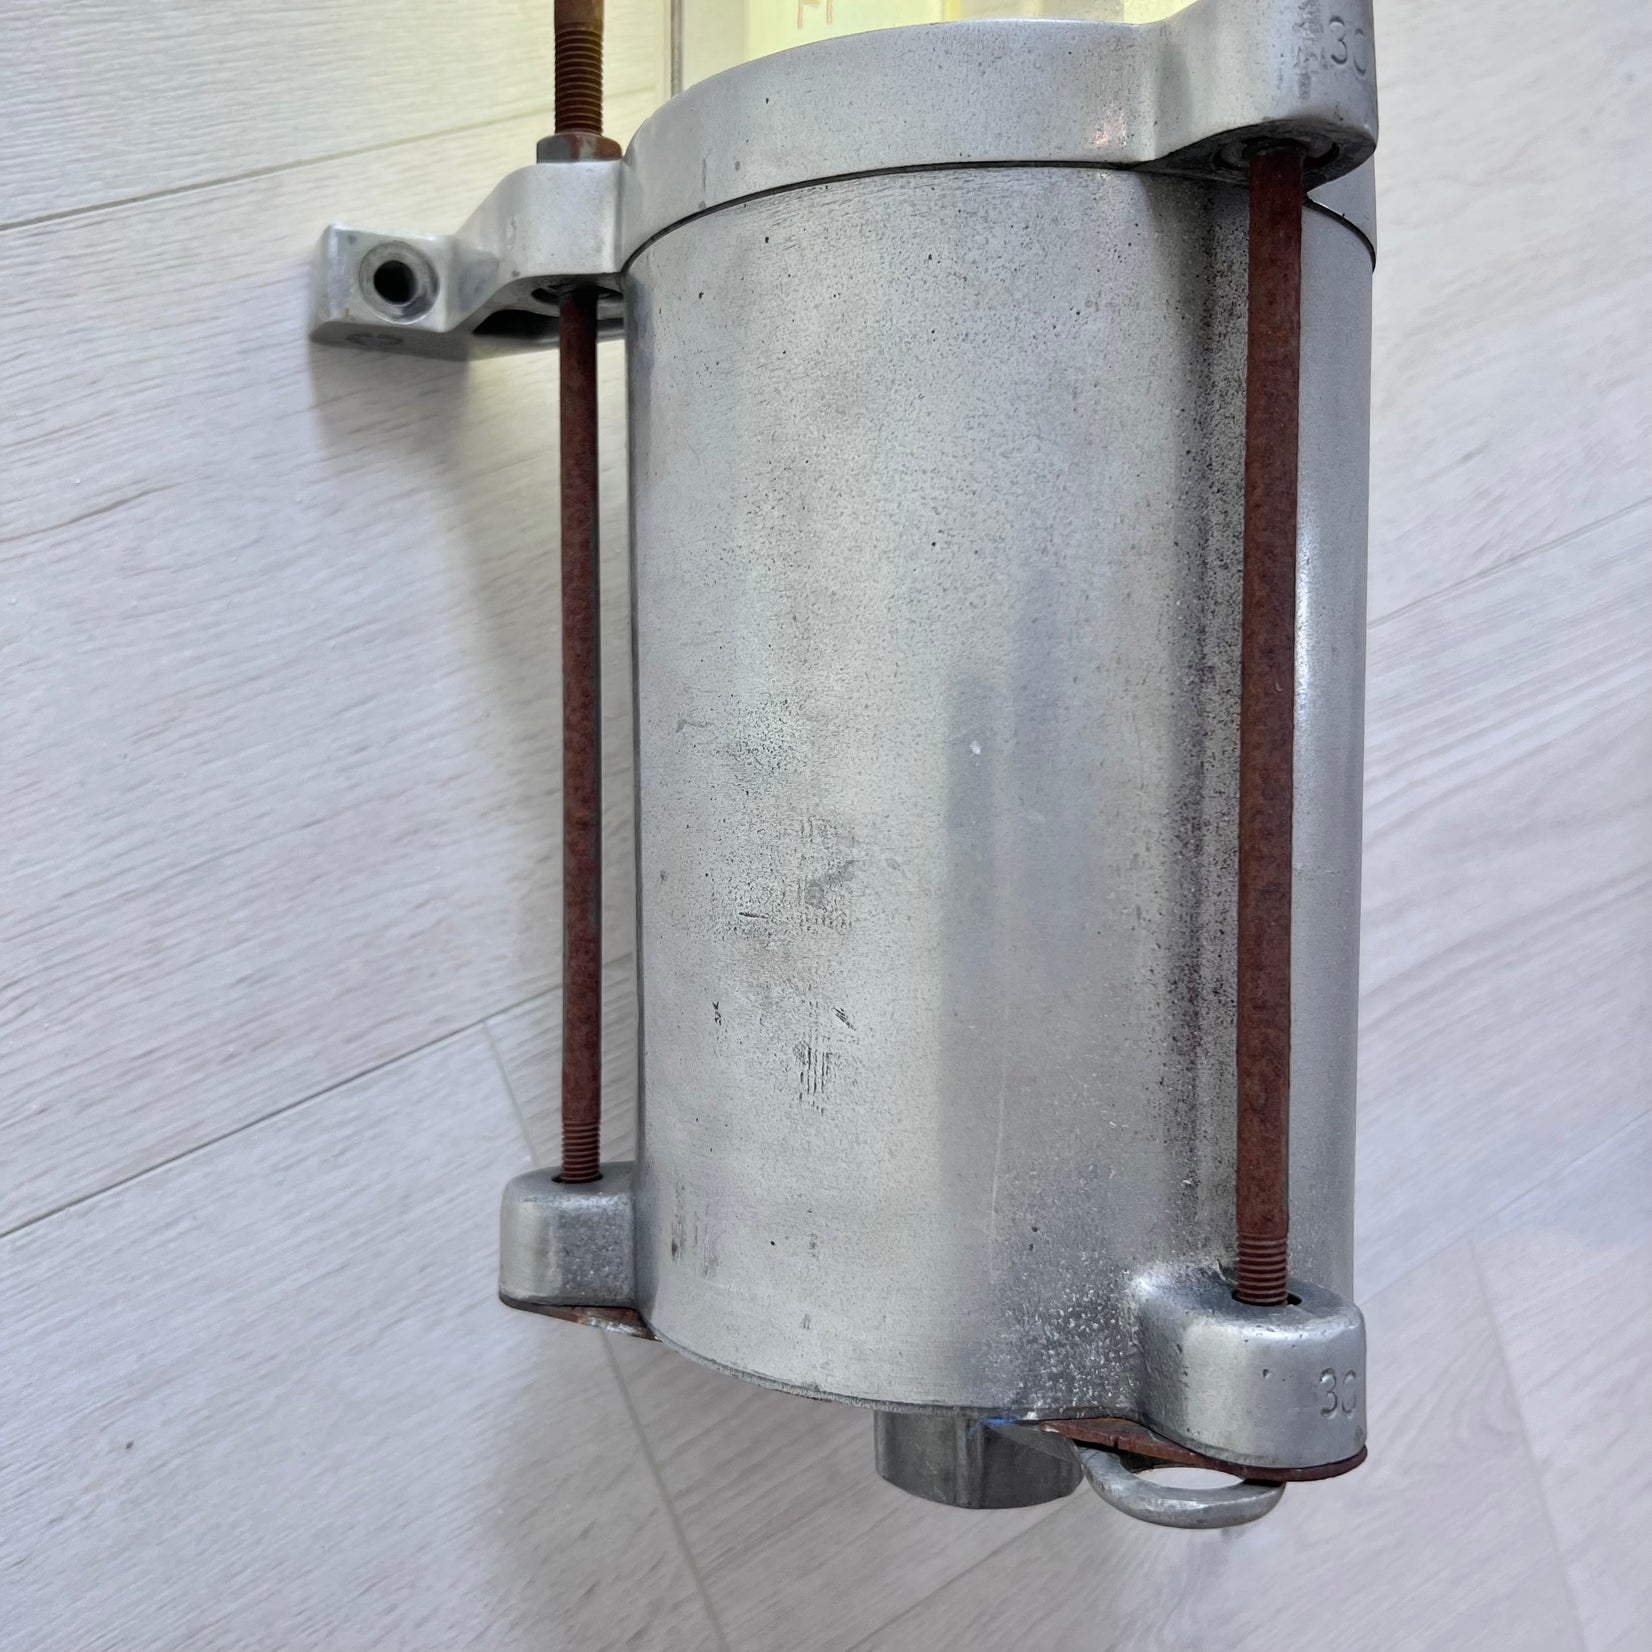 Explosion Proof Mining Lamp, 1970s Germany